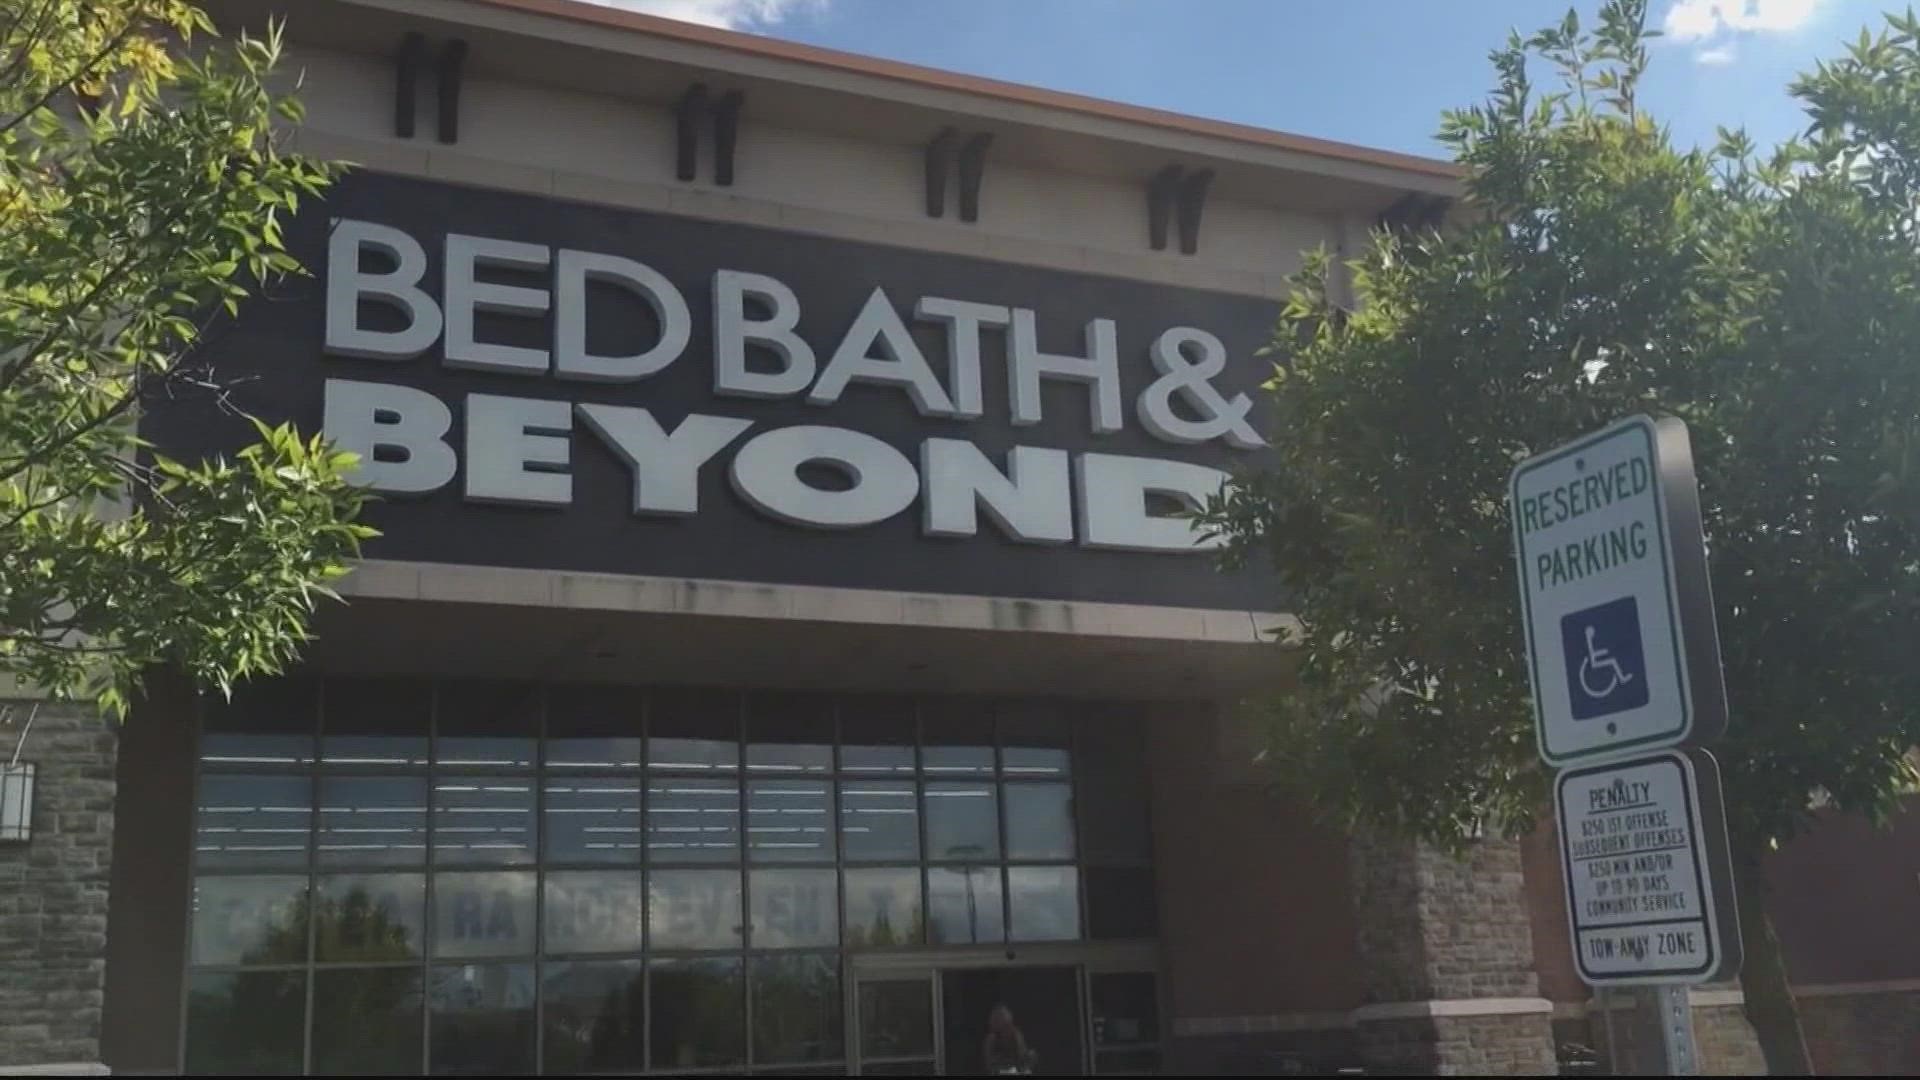 Bed Bath & Beyond said Wednesday that it will shut stores and lay off workers in a bid to turn around its beleaguered business.